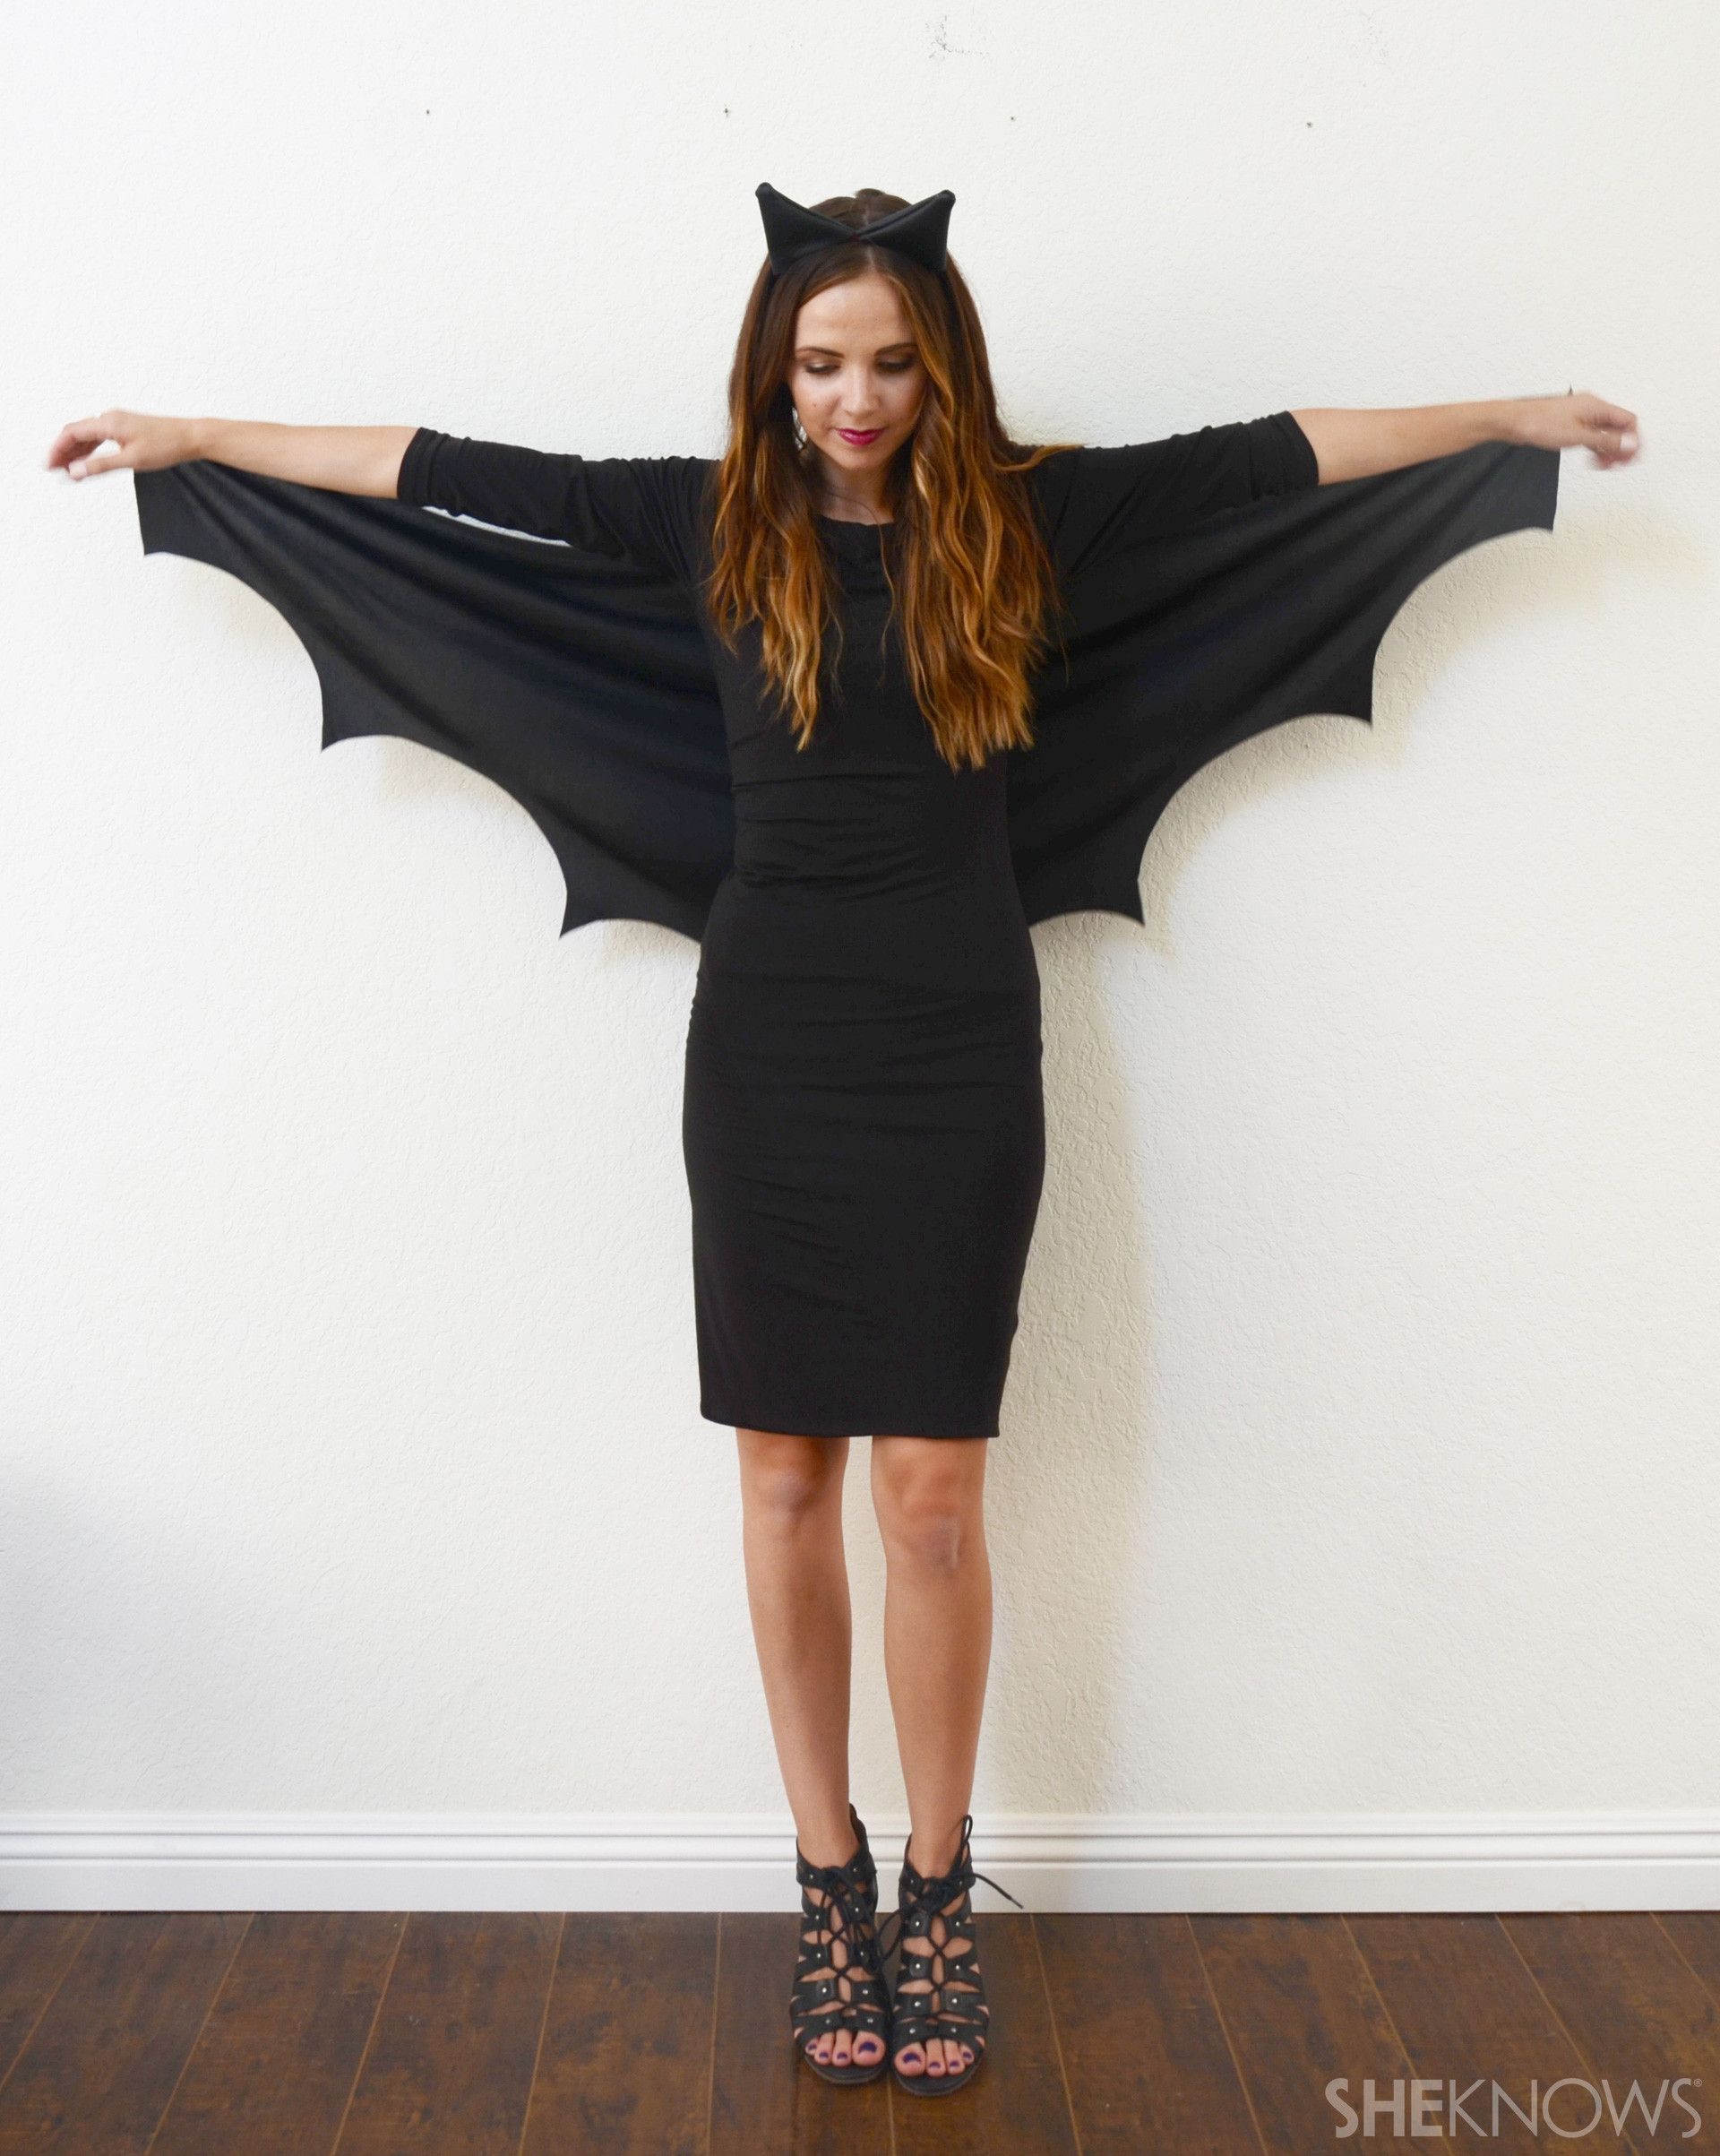 DIY Girls Halloween Costumes
 A DIY Bat Costume so Easy No e Will Know It ly Took 10